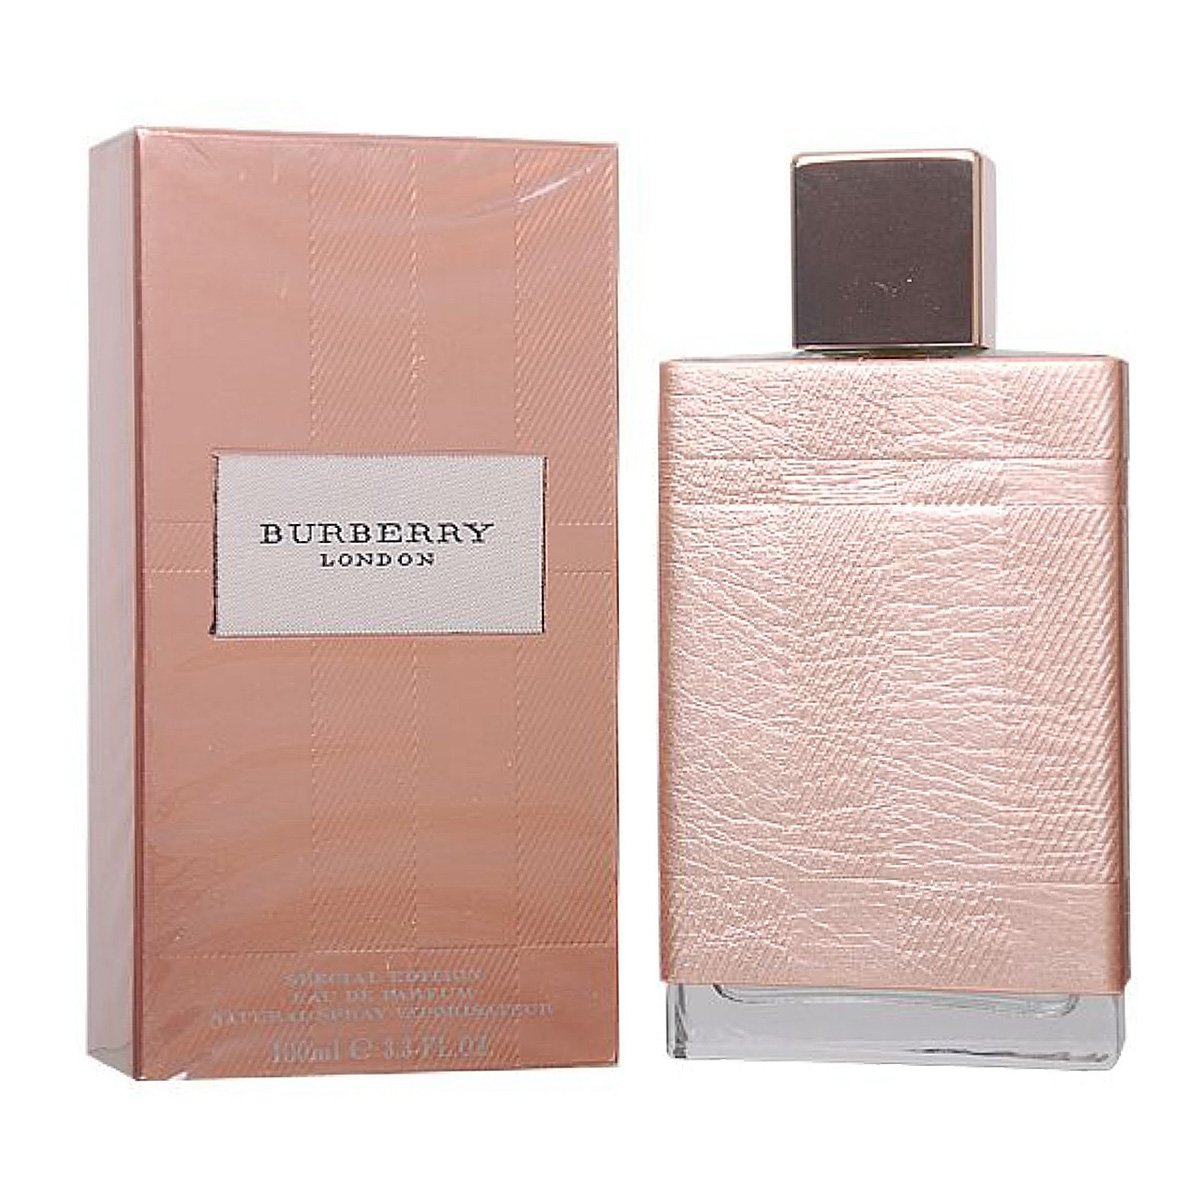 Burberry London Special Edition edp 